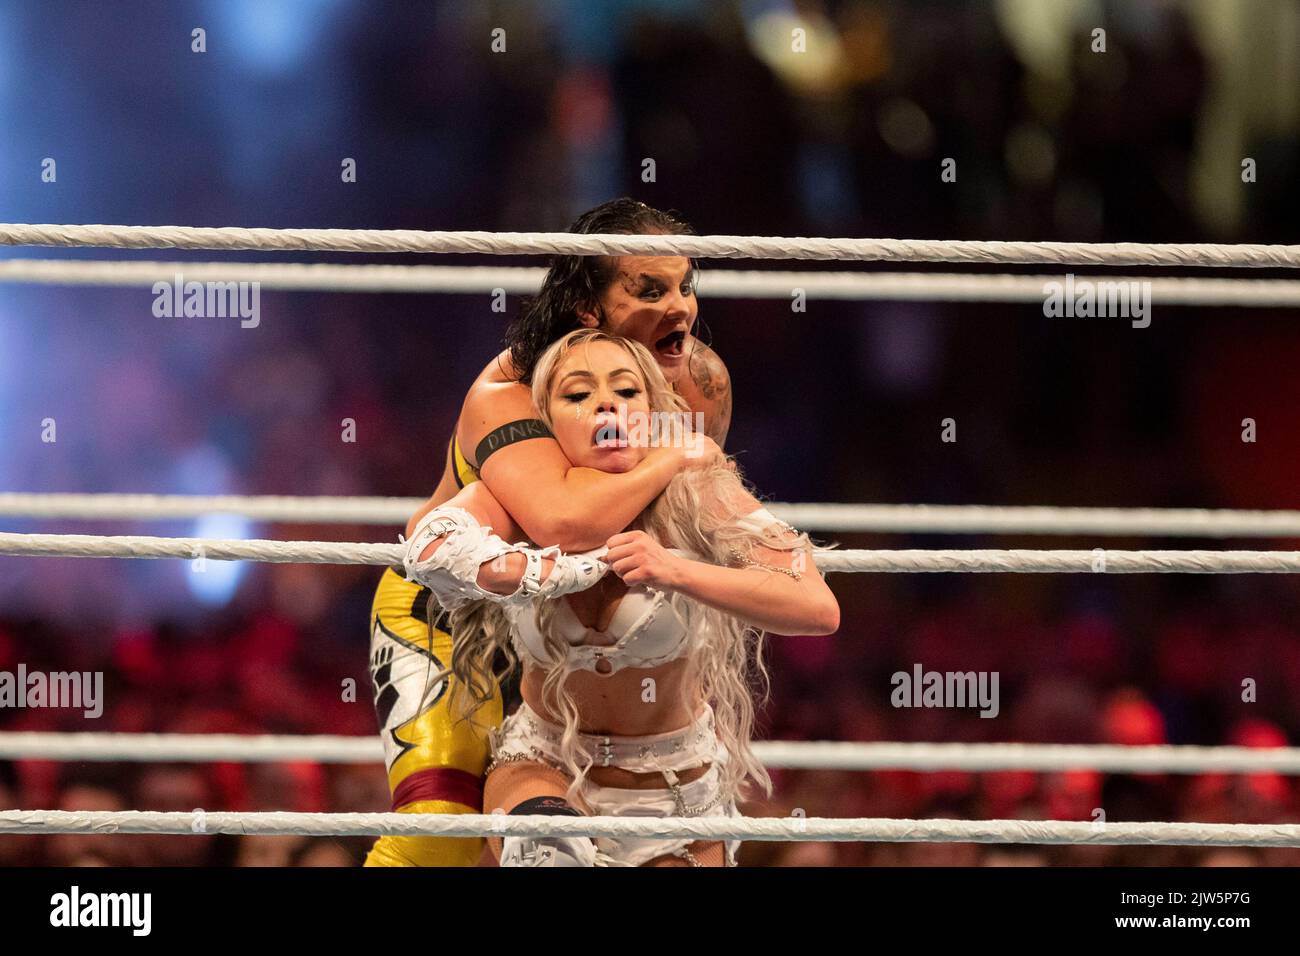 Cardiff, Wales, UK. 3rd Sep, 2022. Liv Morgan vs. Shayna Baszler during the WWE ‘Clash At The Castle' wrestling event at the Principality Stadium in Cardiff. Credit: Mark Hawkins/Alamy Live News Stock Photo